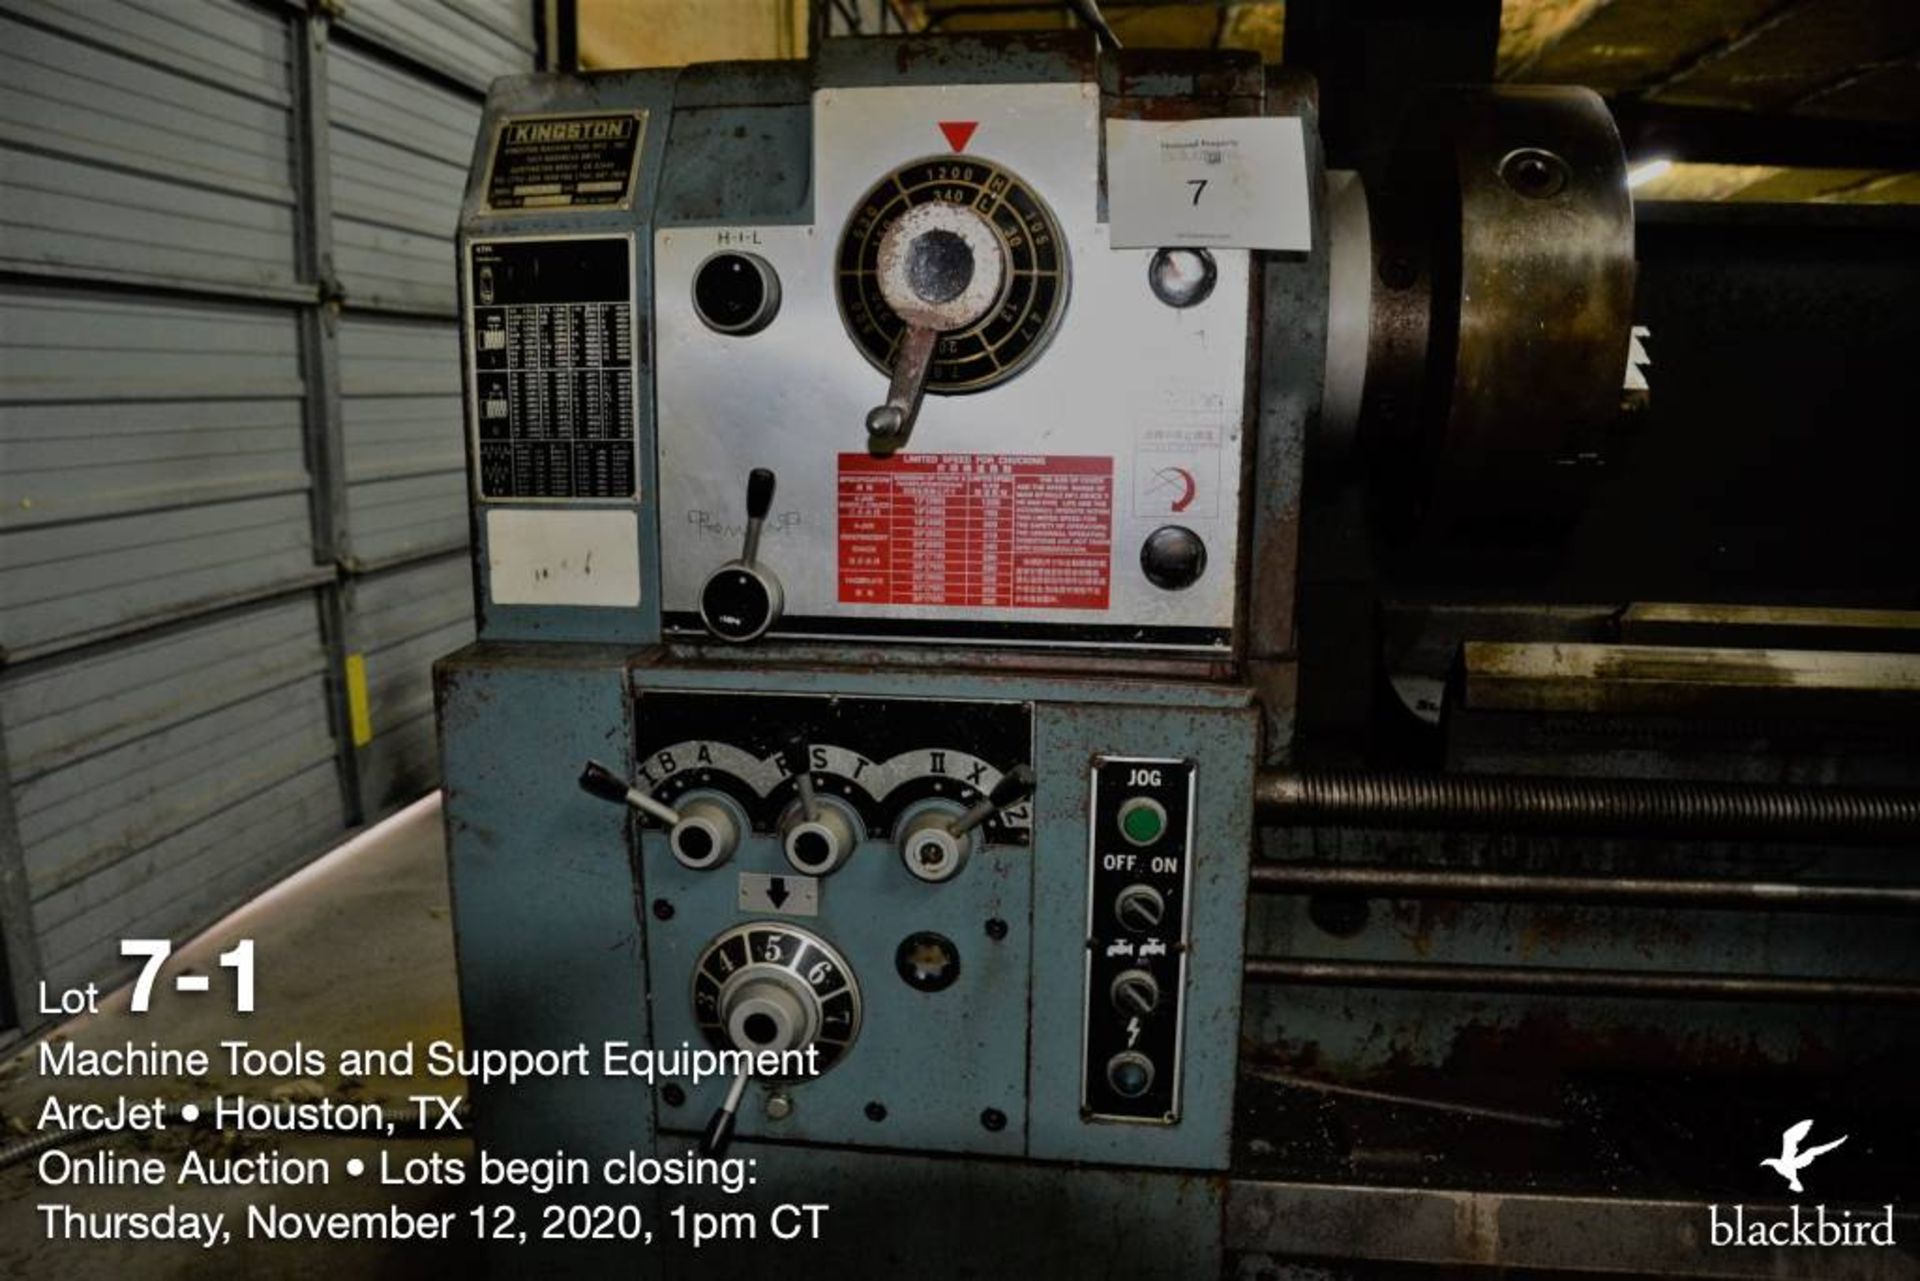 Engine lathe, Kingston HD 2290, 22 in x 90 in, metric & SAE threading, spindle bore 4 1/8 in, 2007 - Image 2 of 12